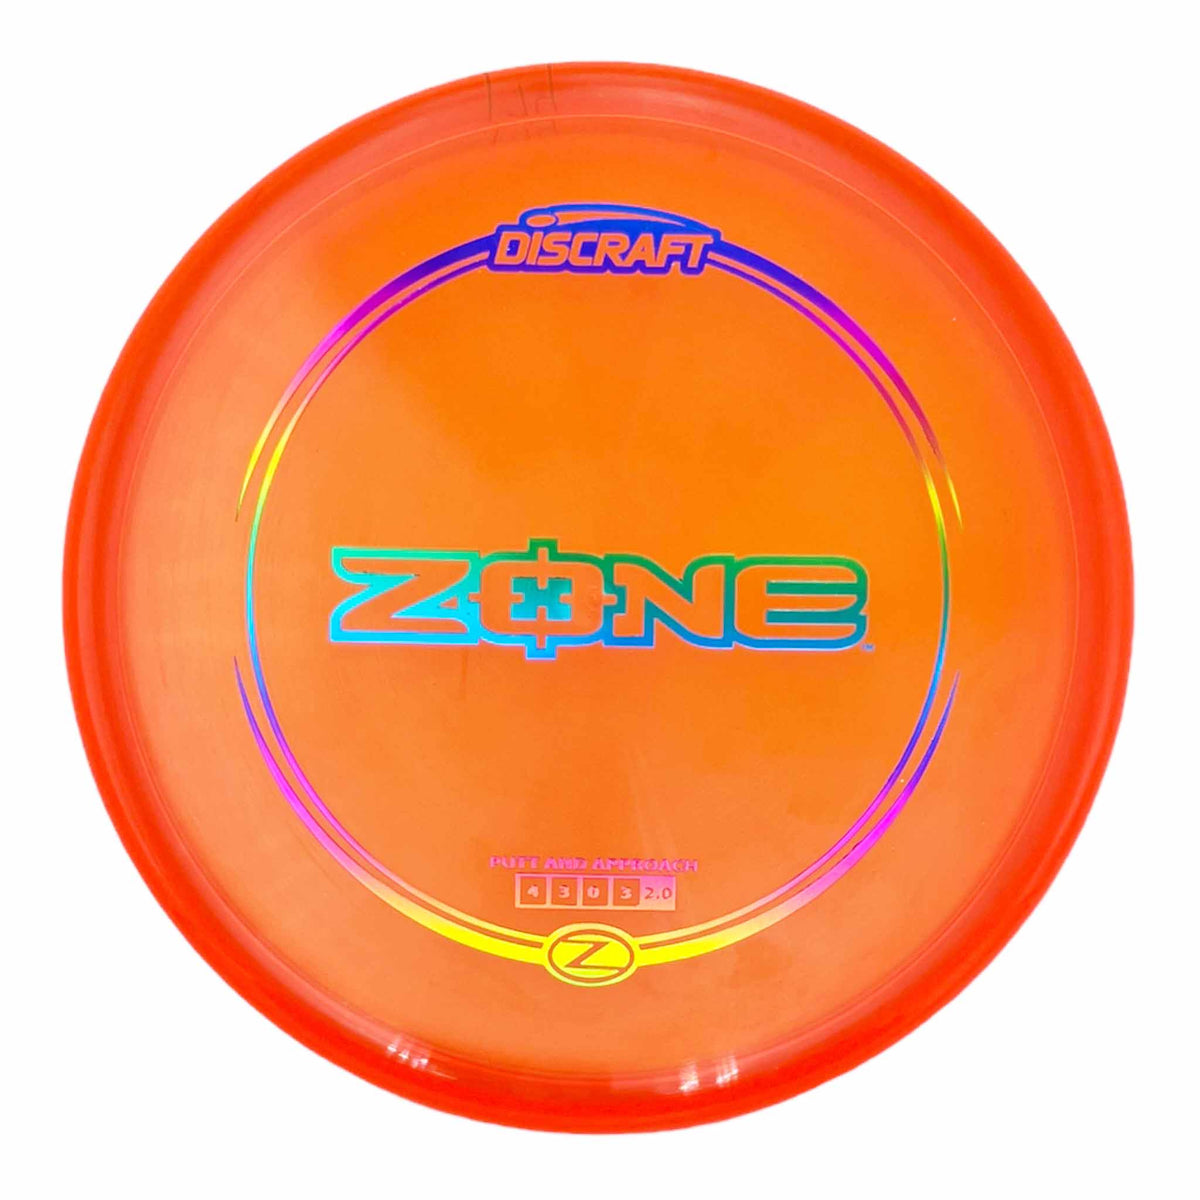 Discraft Z Line Zone putter and approach